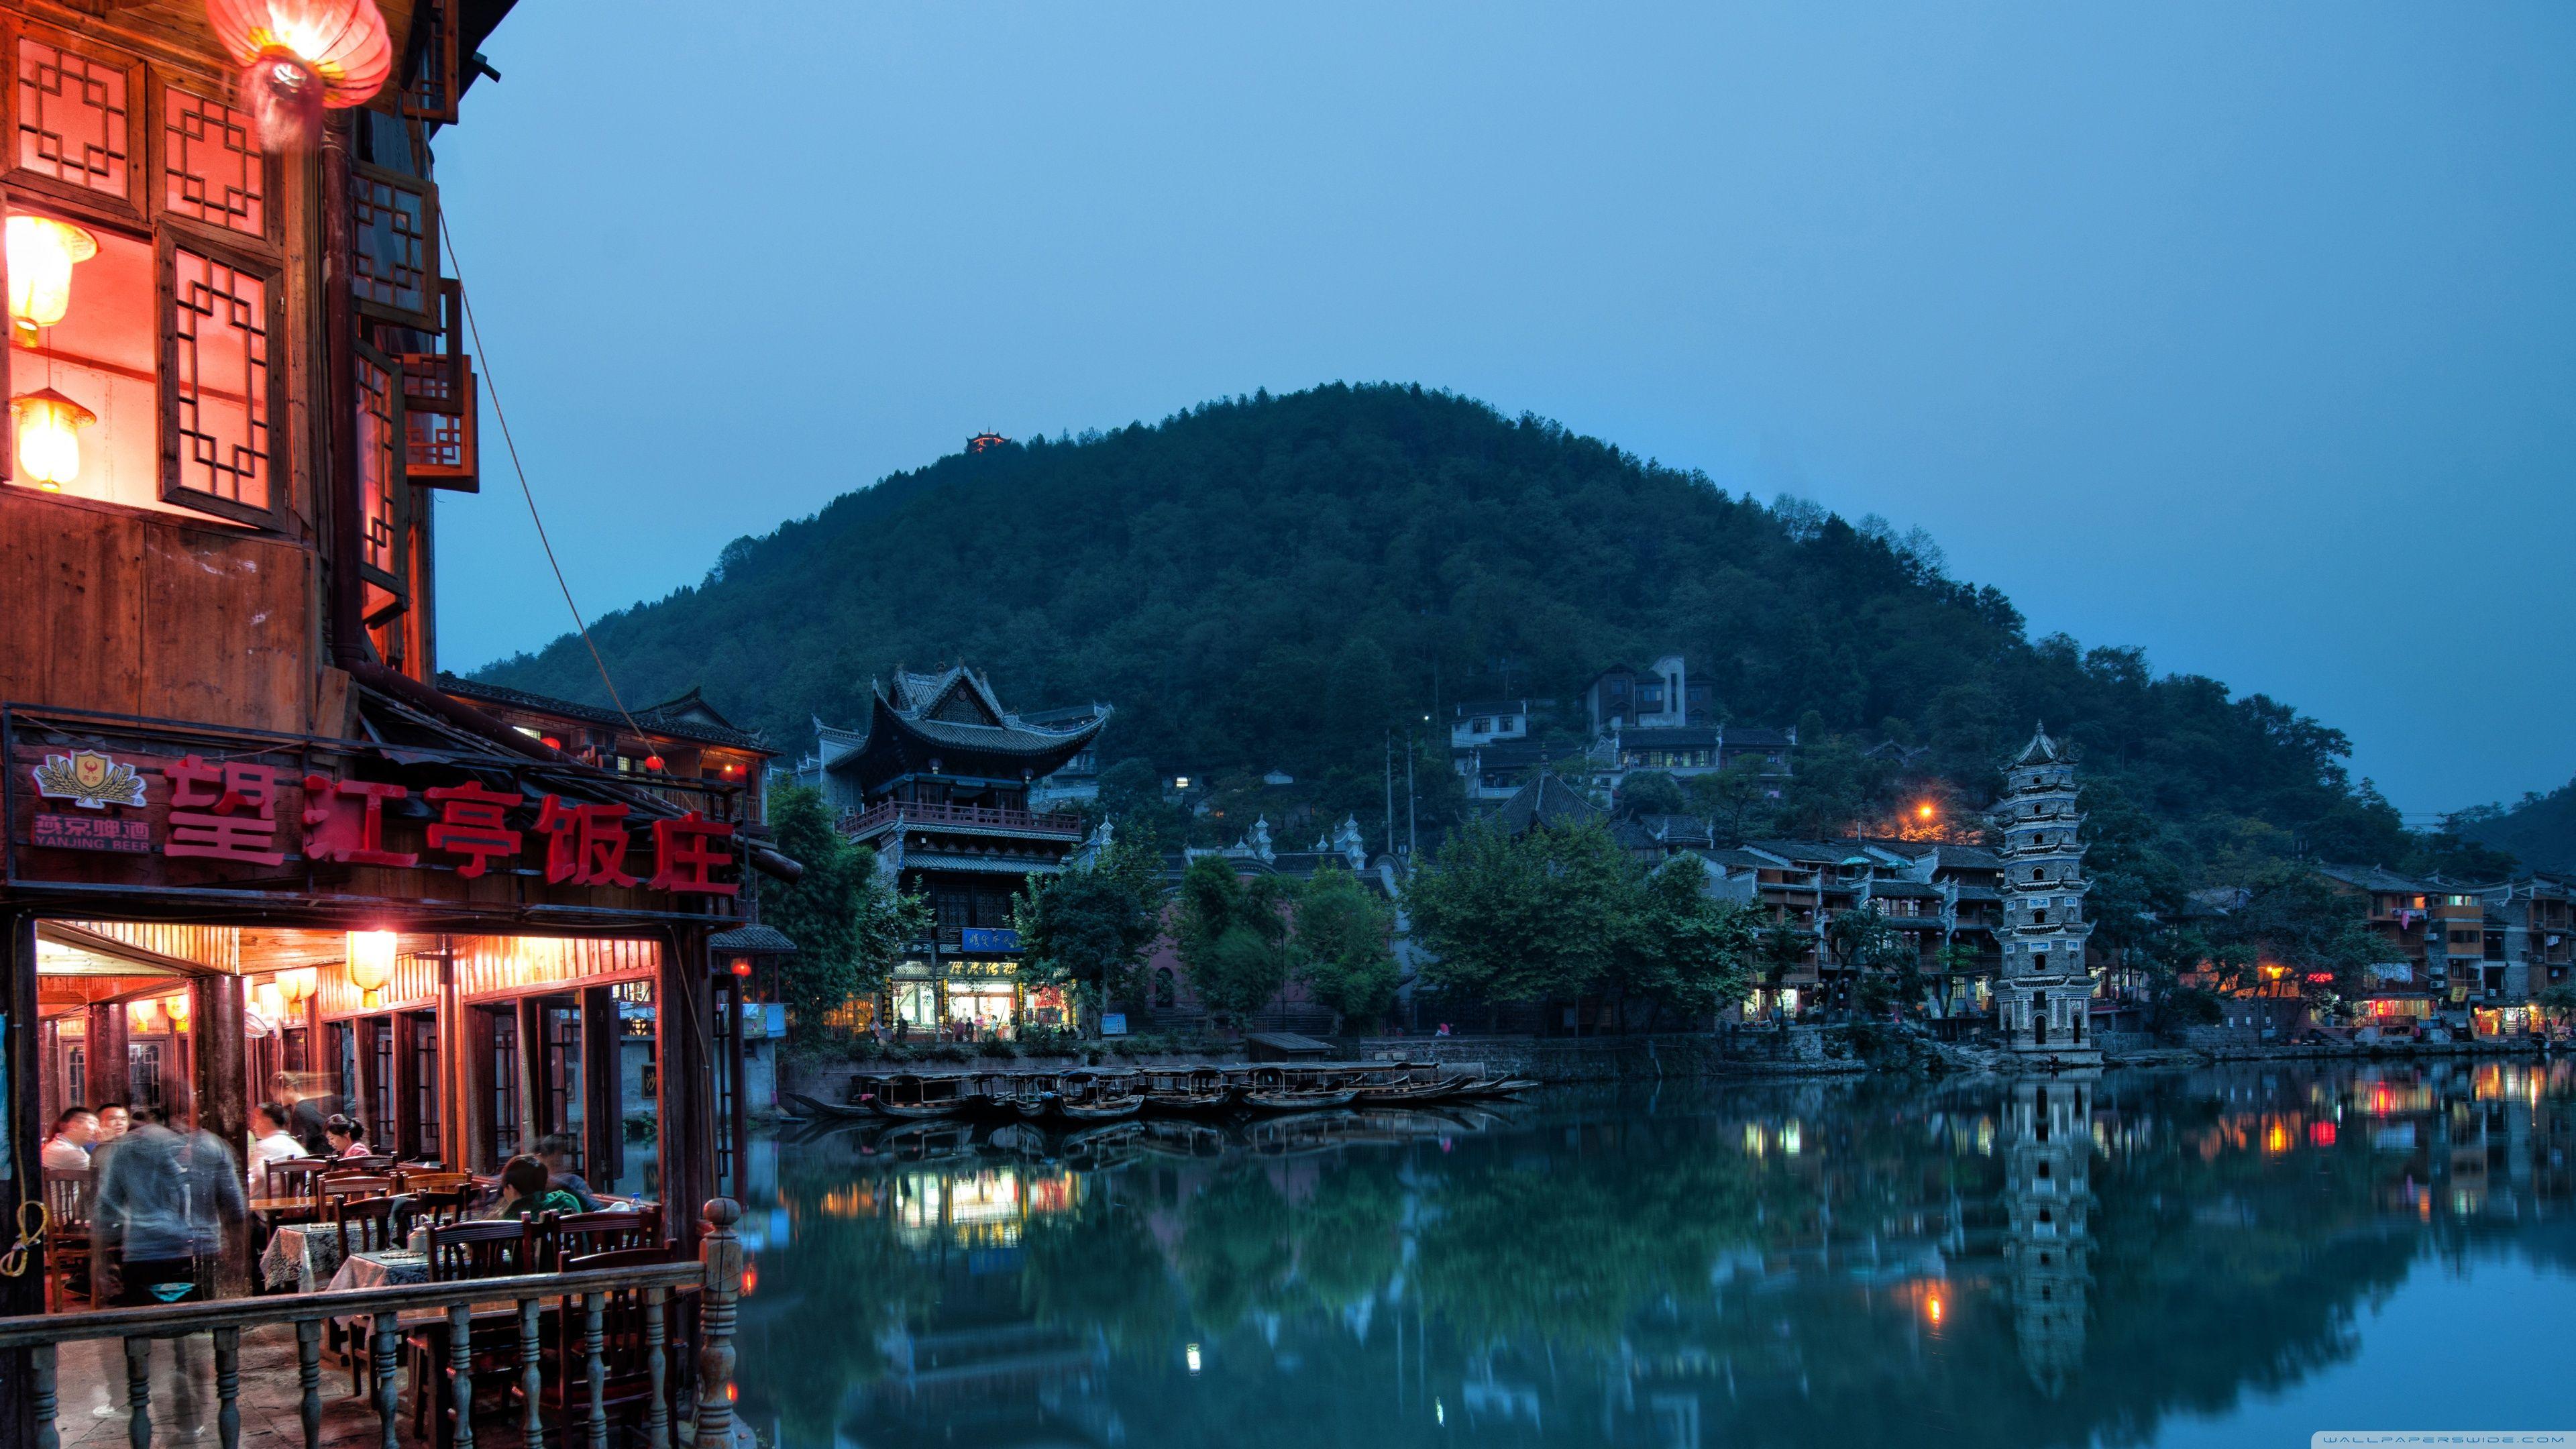 The beautiful night view of the town of Fenghuang, China - Chinese